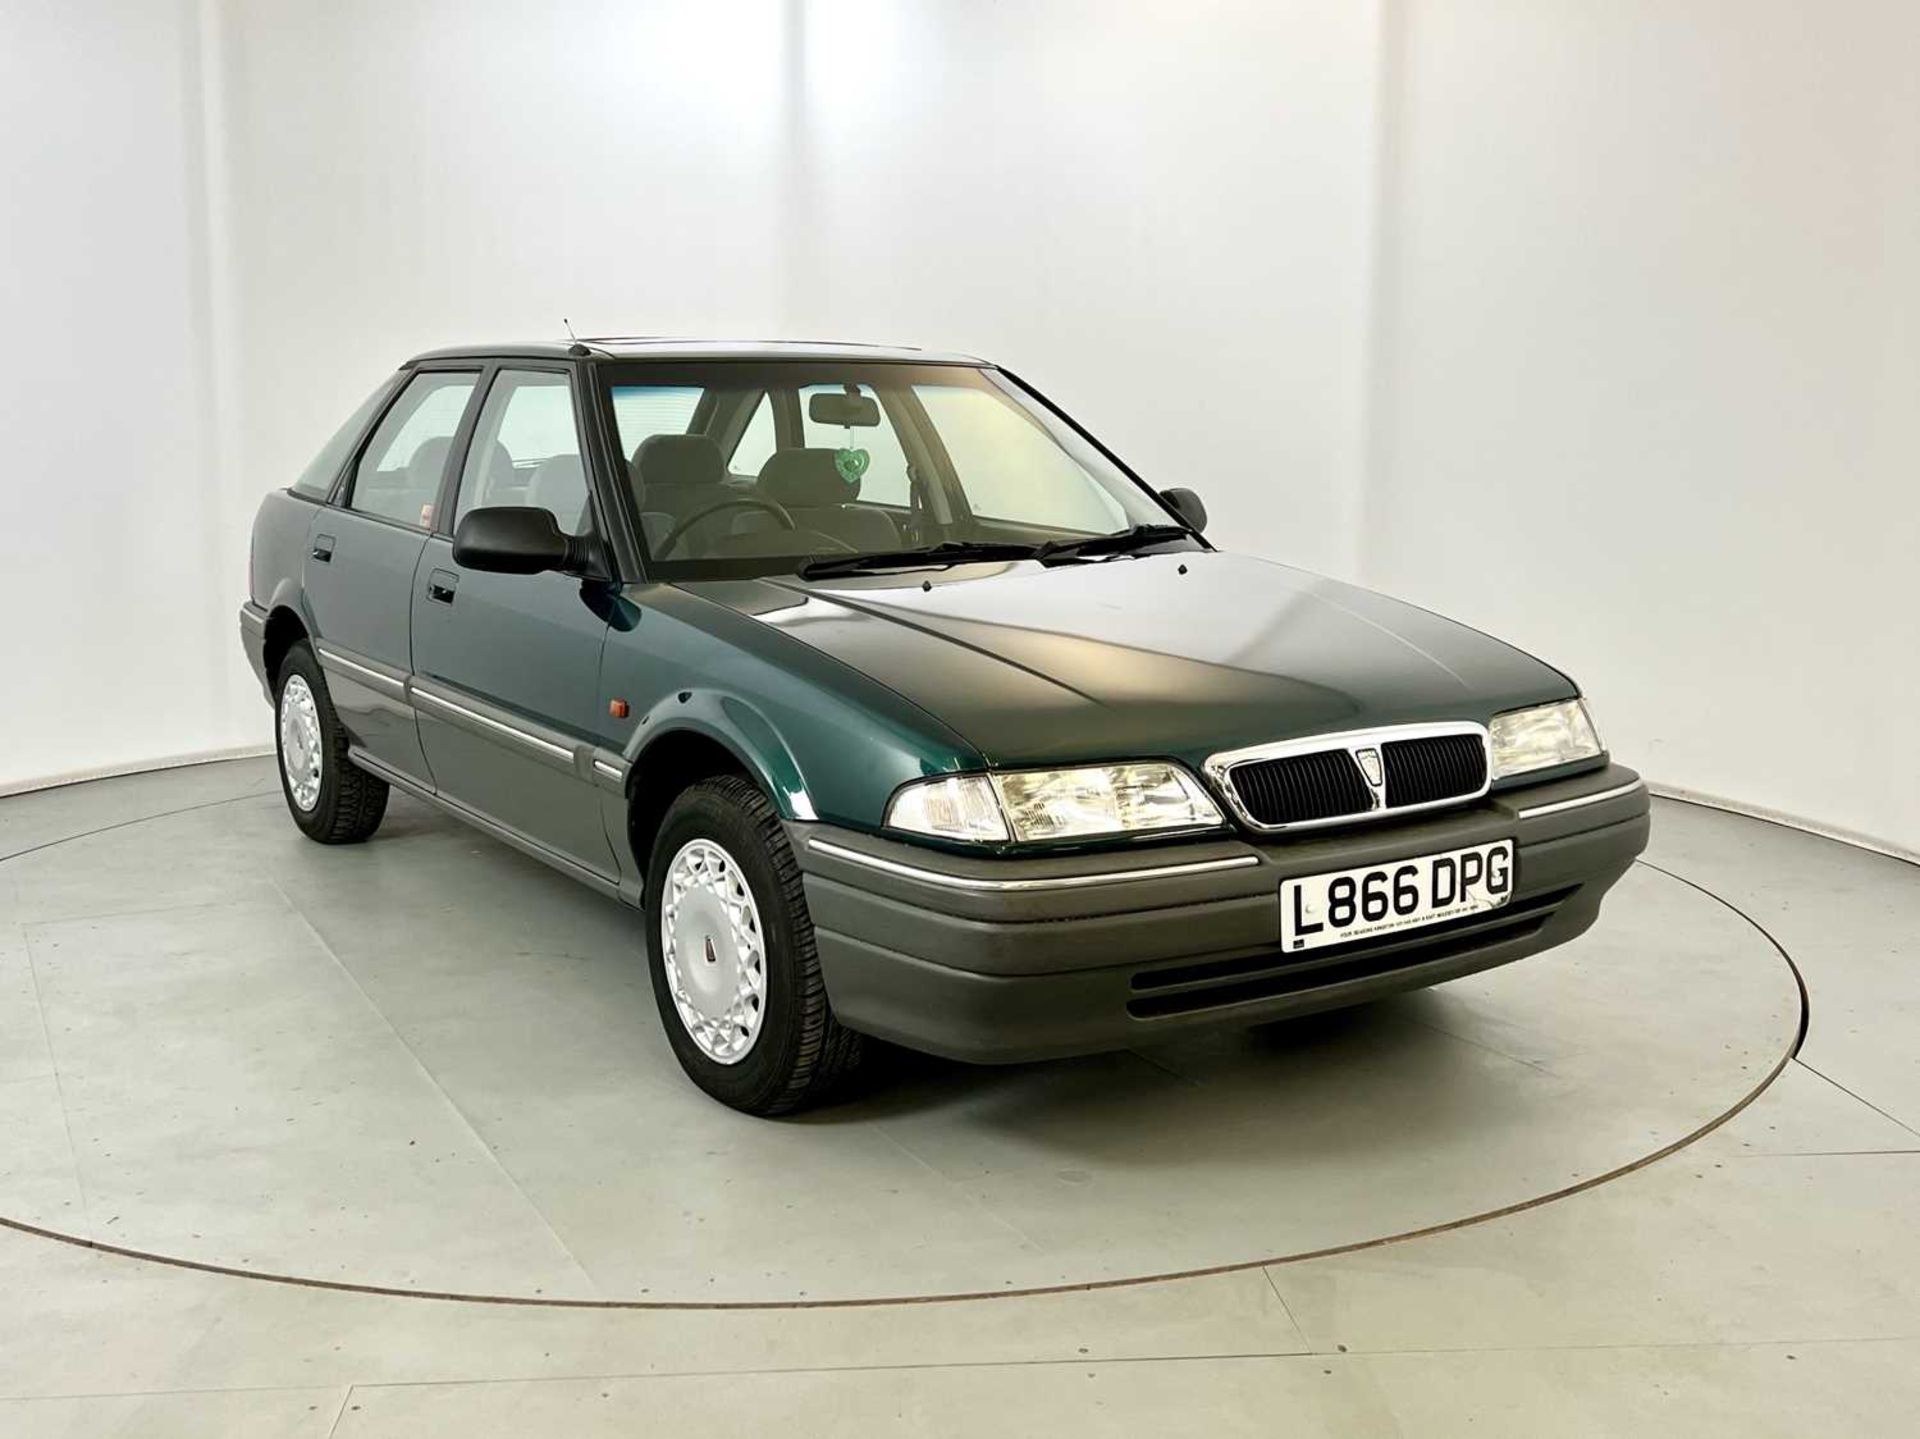 1993 Rover 218 1 former keeper and only 23,000 miles